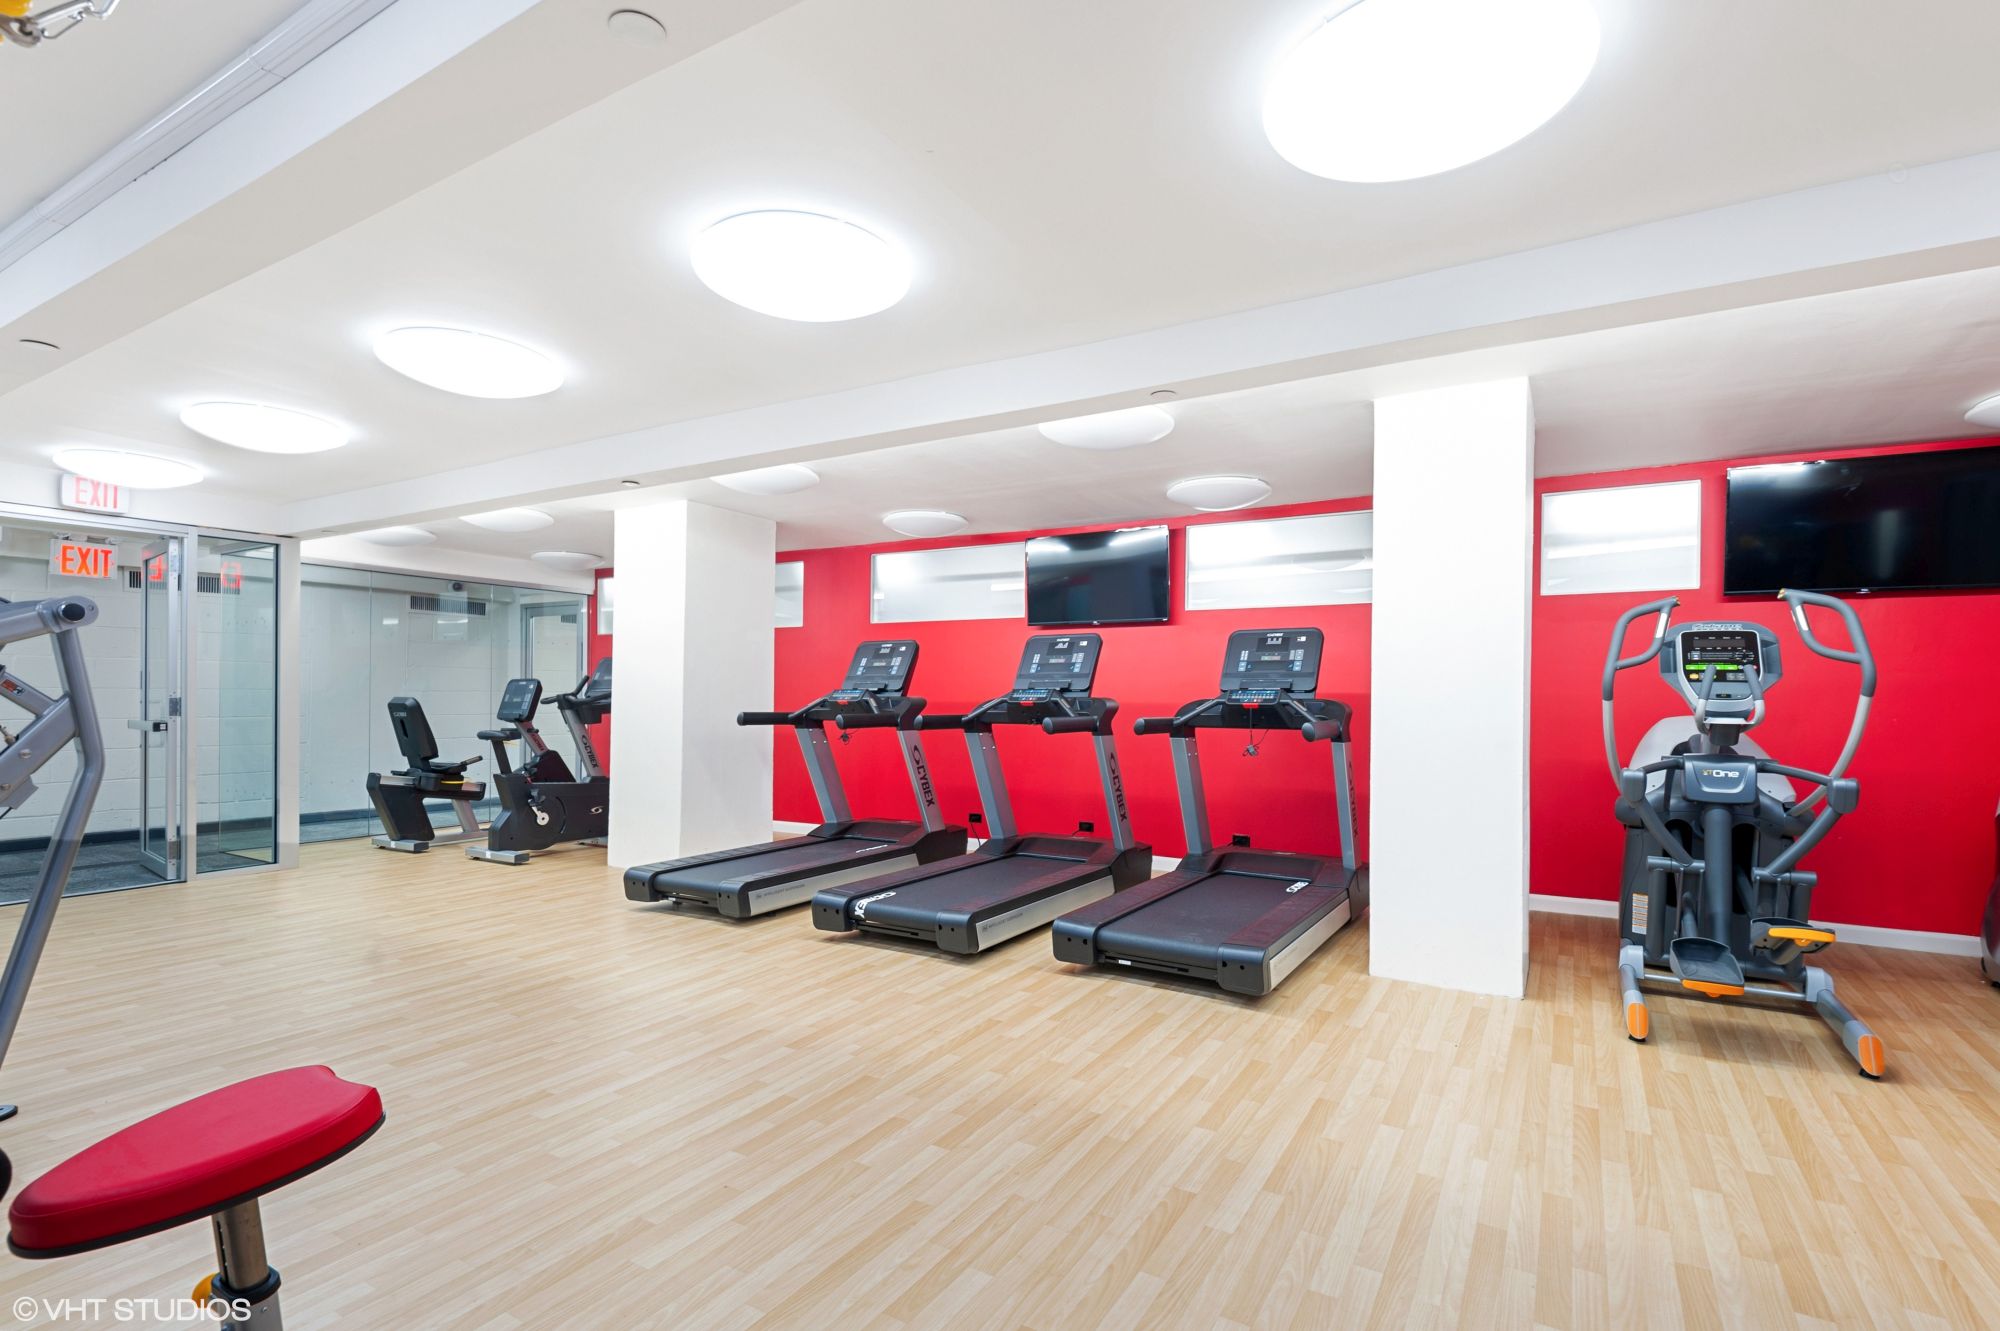 The fitness center at The Promenade, located in Marble Hill, is outfitted with state-of-the-art cardio machines, including new treadmills, elliptical, and recumbent bicycle. 